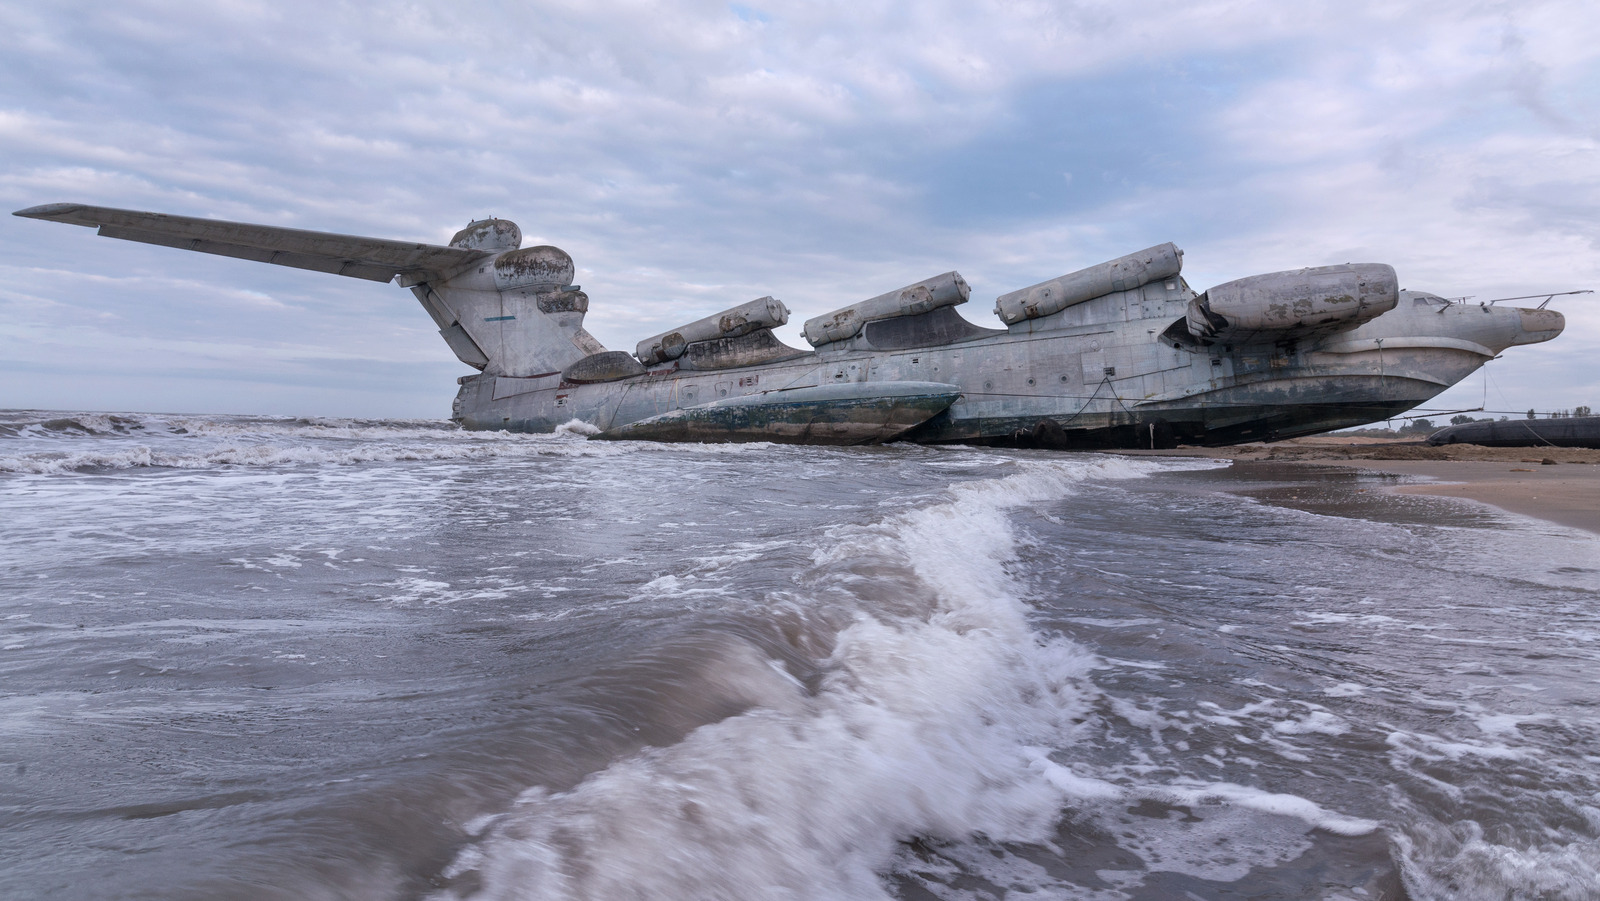 The Caspian Sea Monster: A Monumental Soviet Aircraft That Defied Convention